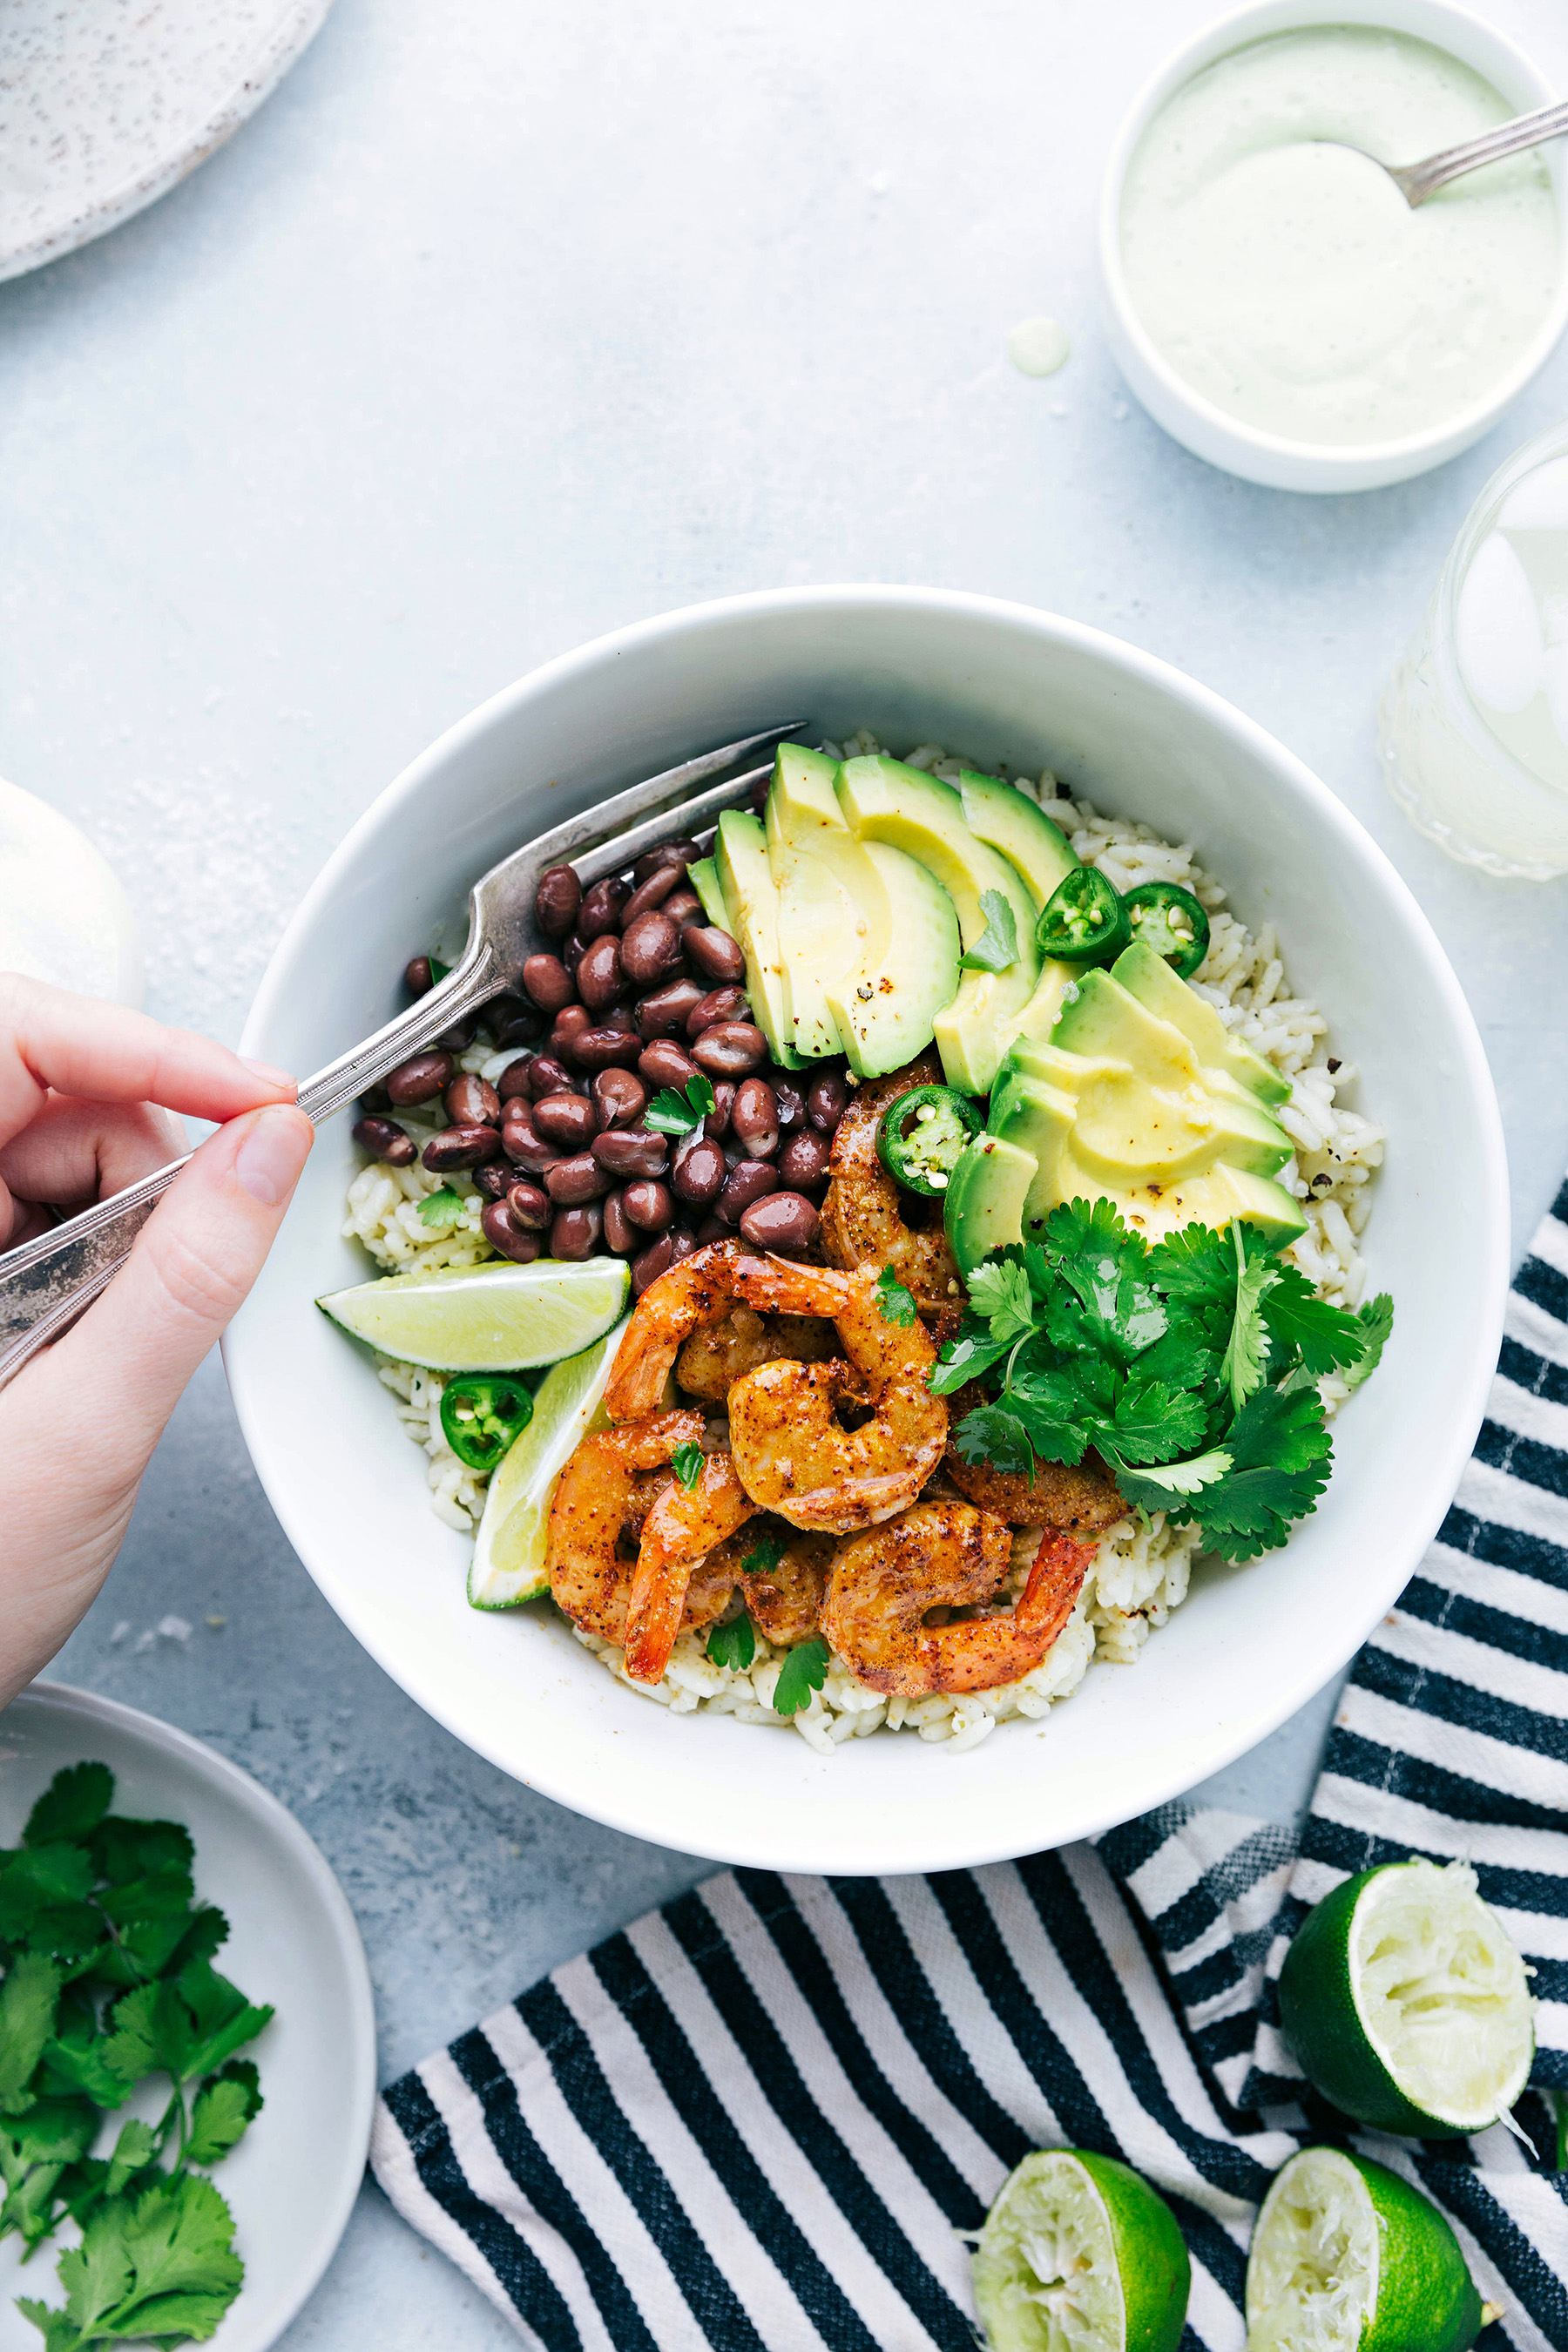 Cilantro Lime Shrimp Bowls: This tasty spicy shrimp dish with black beans, avocado and a creamy lime sauce is made simple with our flavorful cilantro lime rice. It’s perfect for lunch or dinner any day of the week!